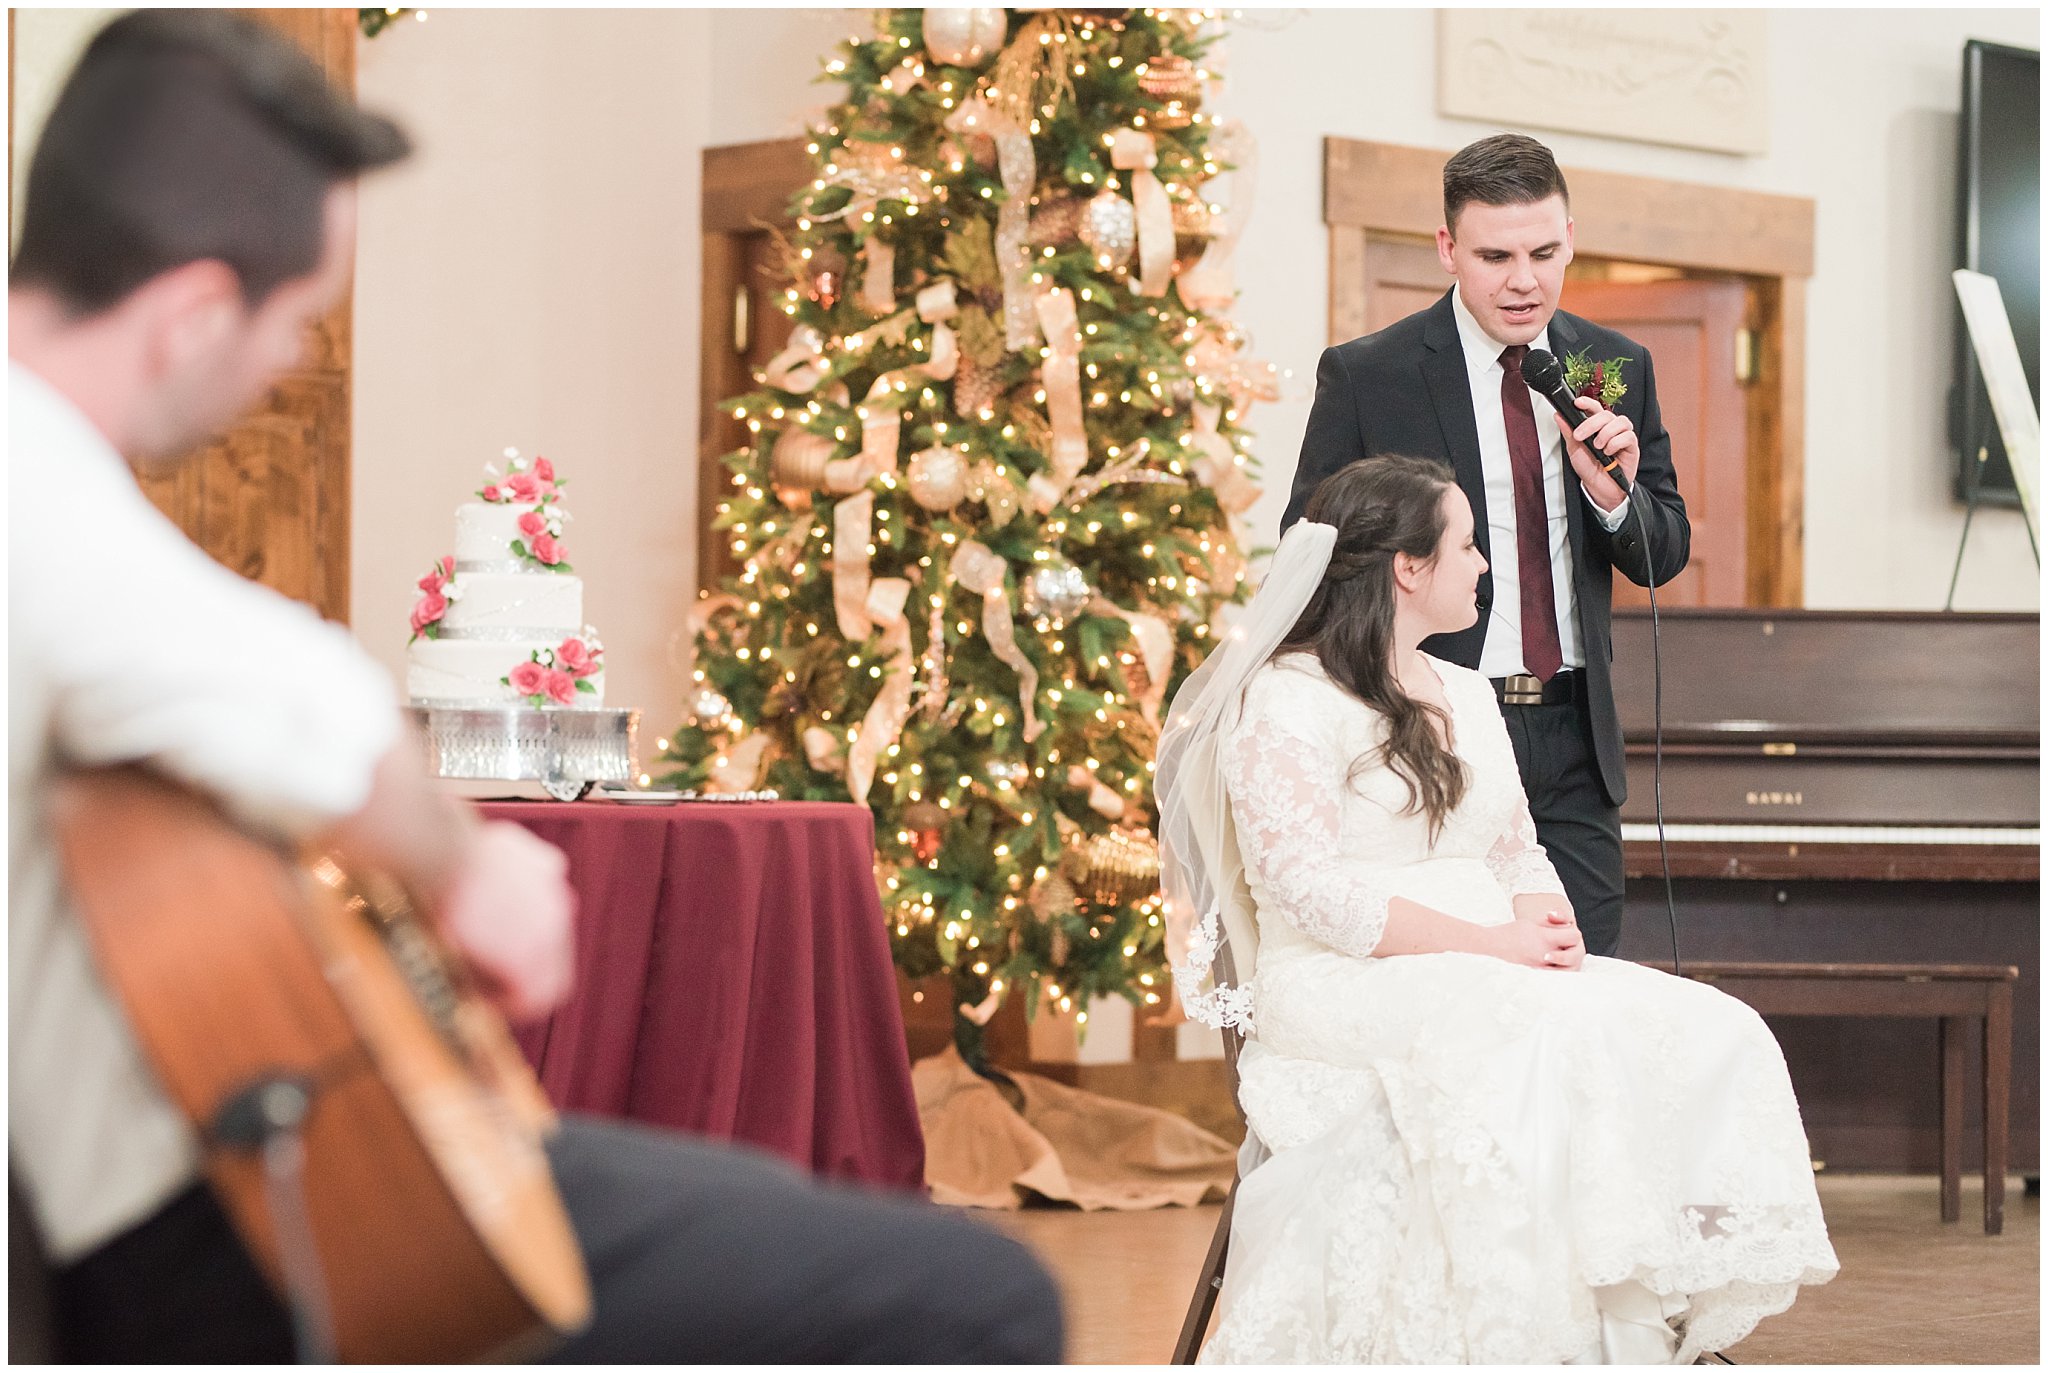 Bride and groom sing together at the Gathering Place at Gardner Village | Gardner Village Wedding | The Gathering Place | Jessie and Dallin Photography